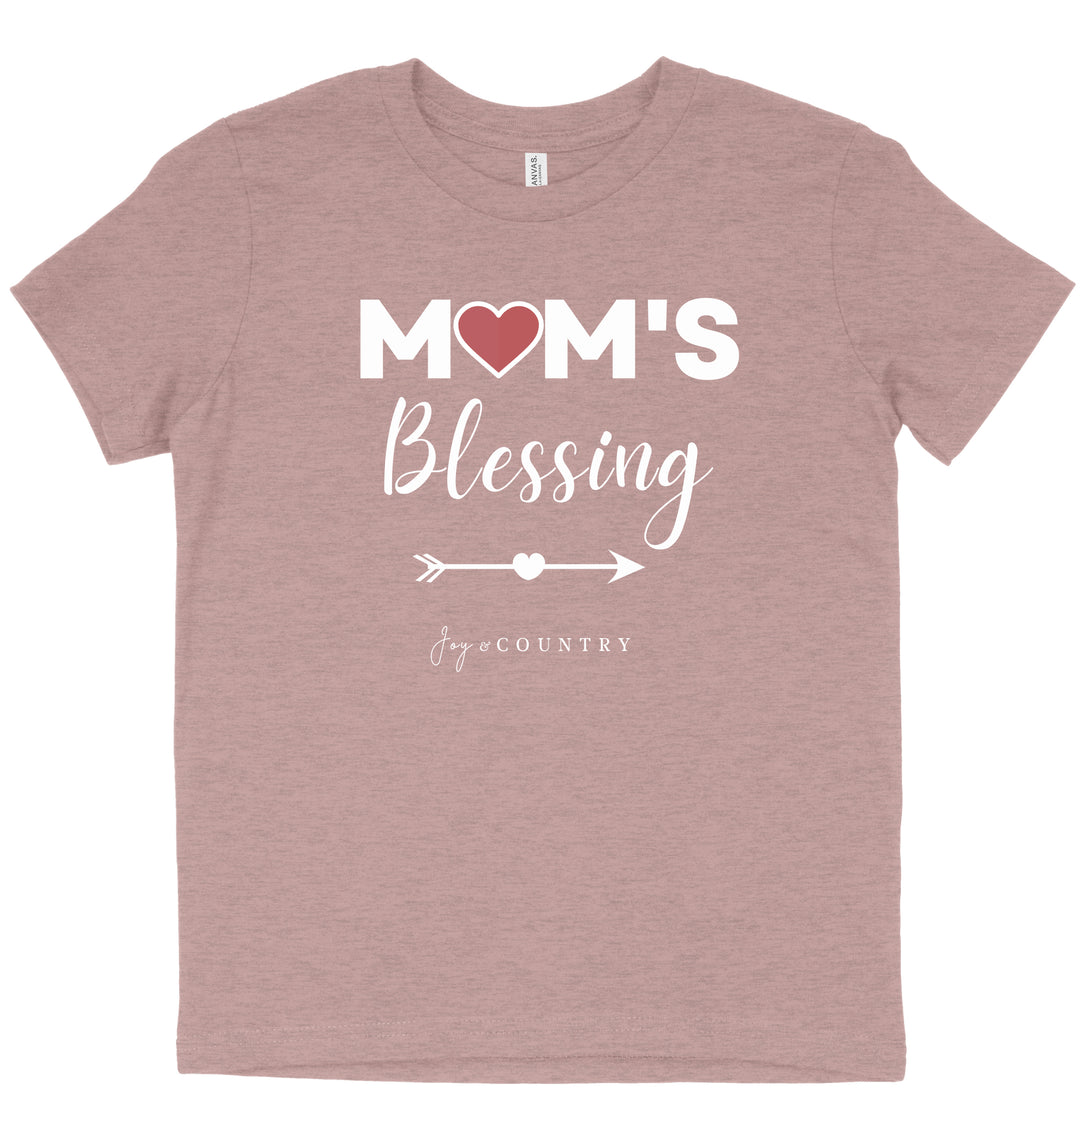 Mom's Blessing - Youth Crew-Neck Tee (Youth size 6-20) - Joy & Country